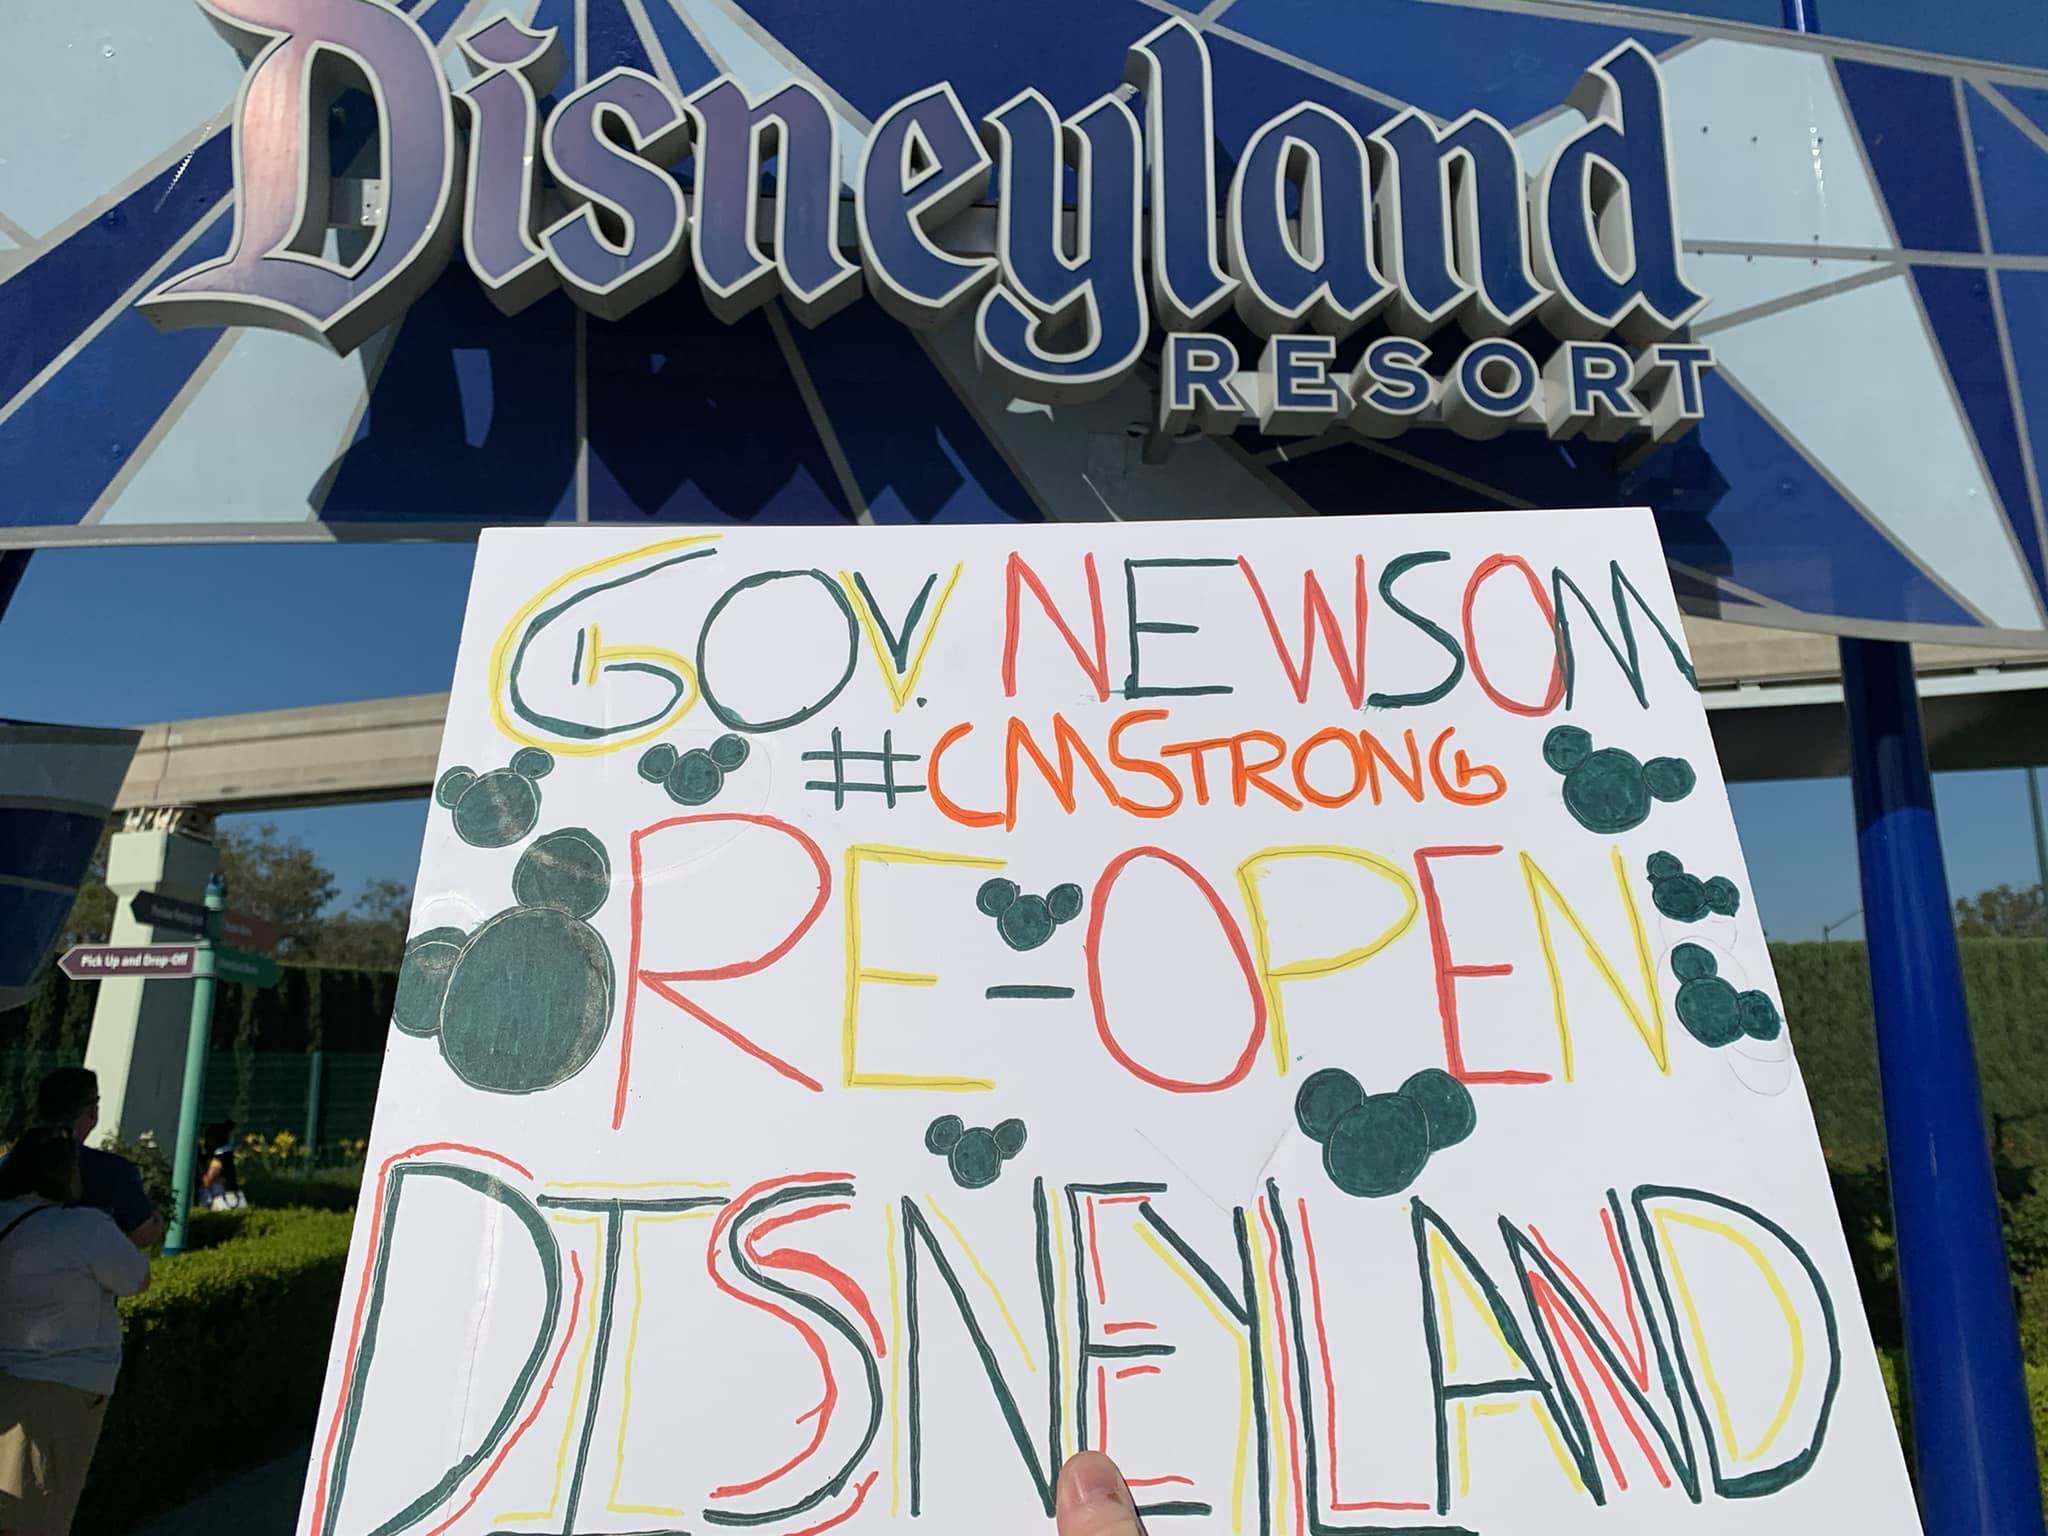 Another 'Reopen Disneyland' Rally is scheduled for next Saturday